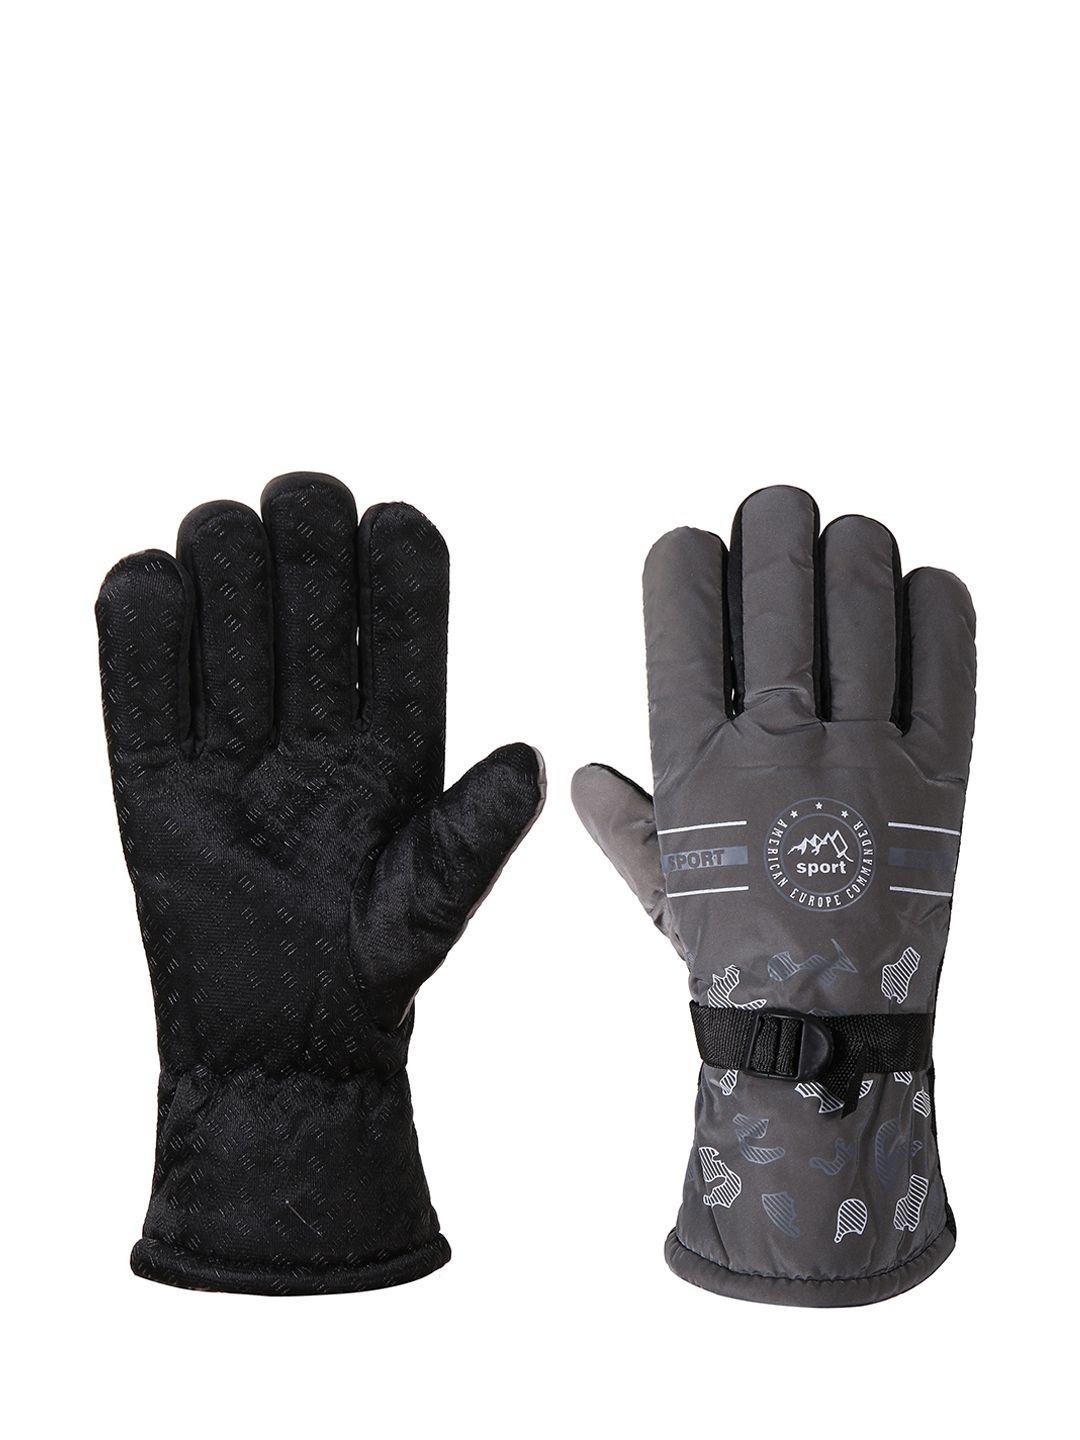 alexvyan men printed snow & wind proof protective riding gloves